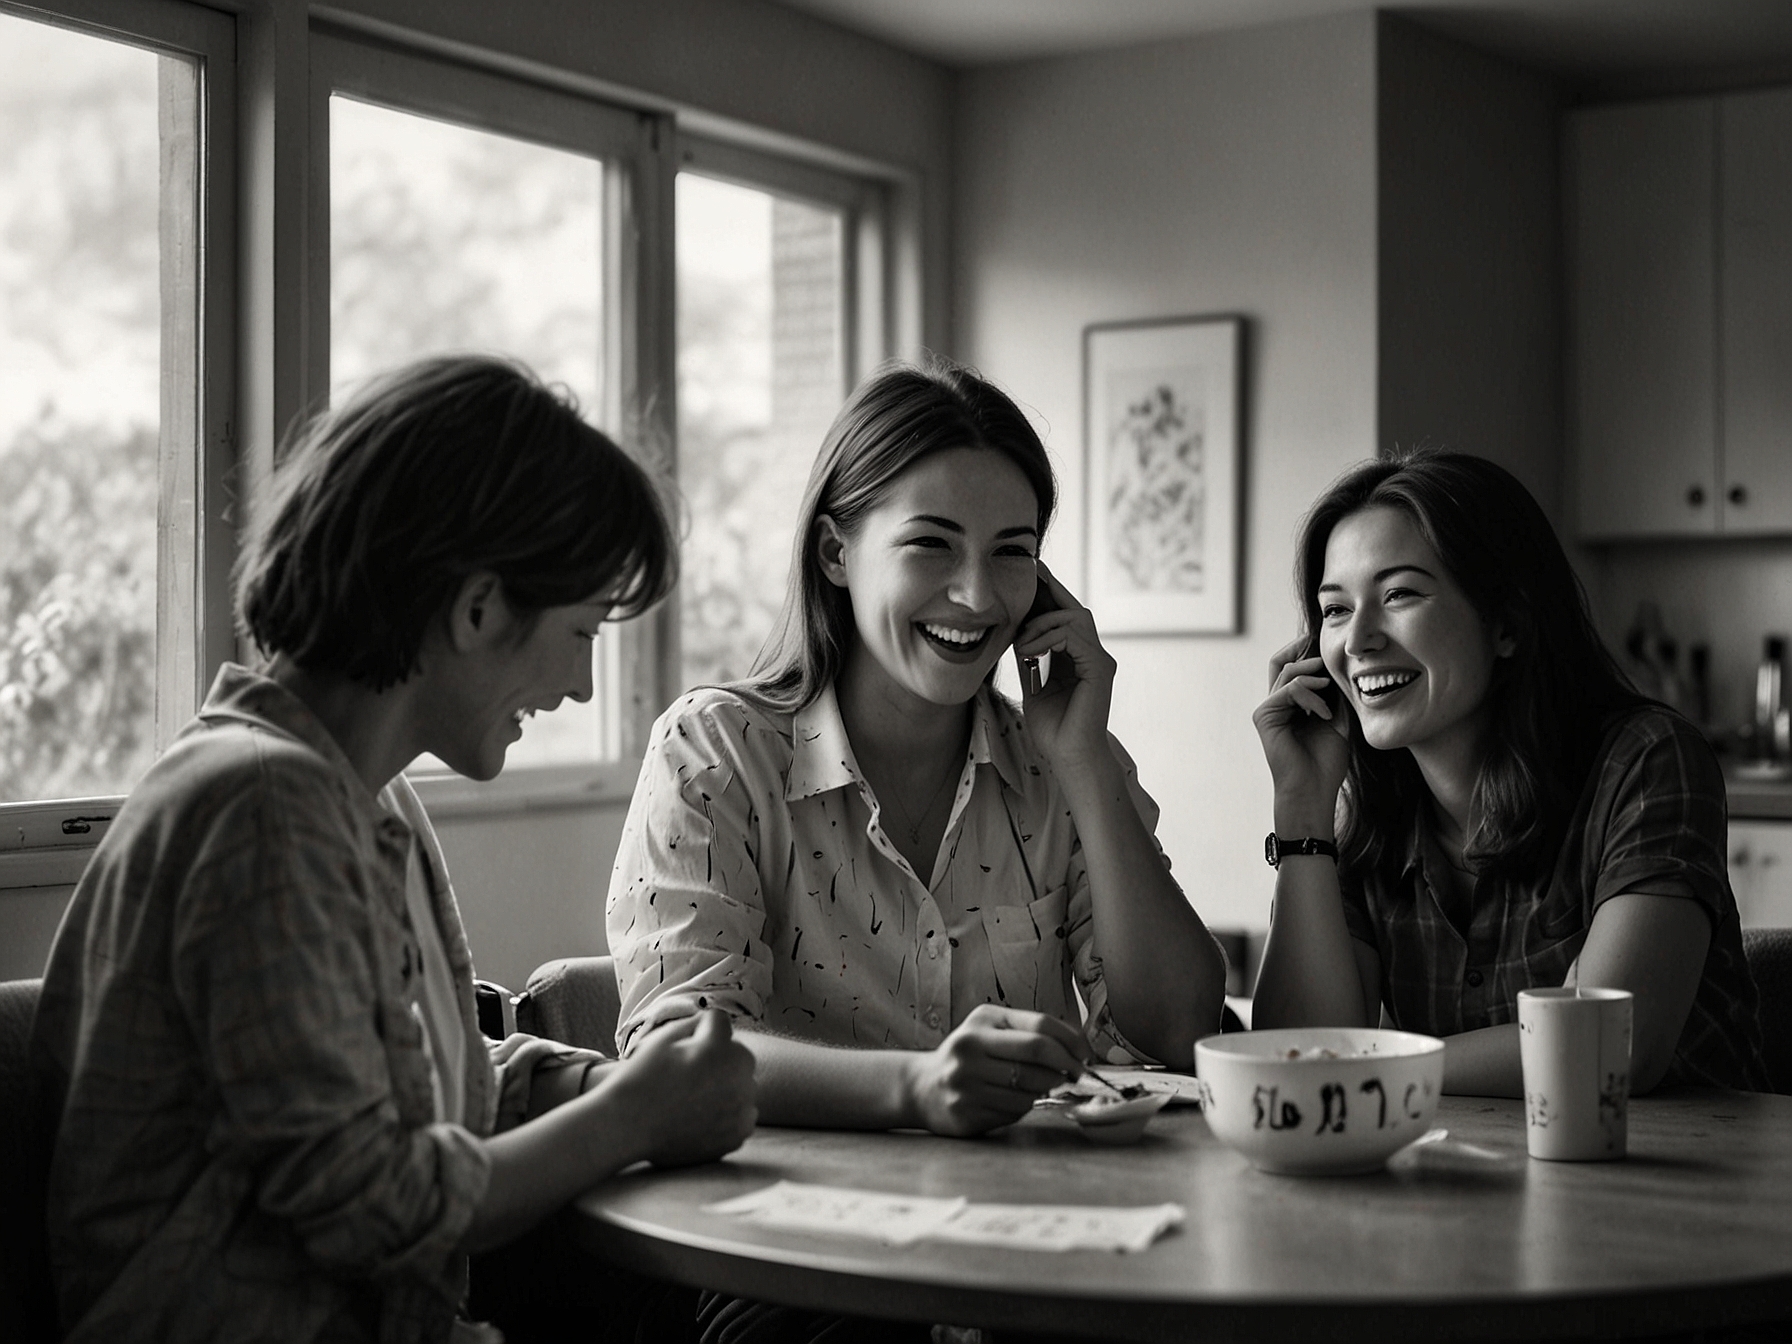 An anonymous woman on the phone with her family, smiling and animatedly sharing the good news of her lottery win during a lunch break that started as an ordinary workday.